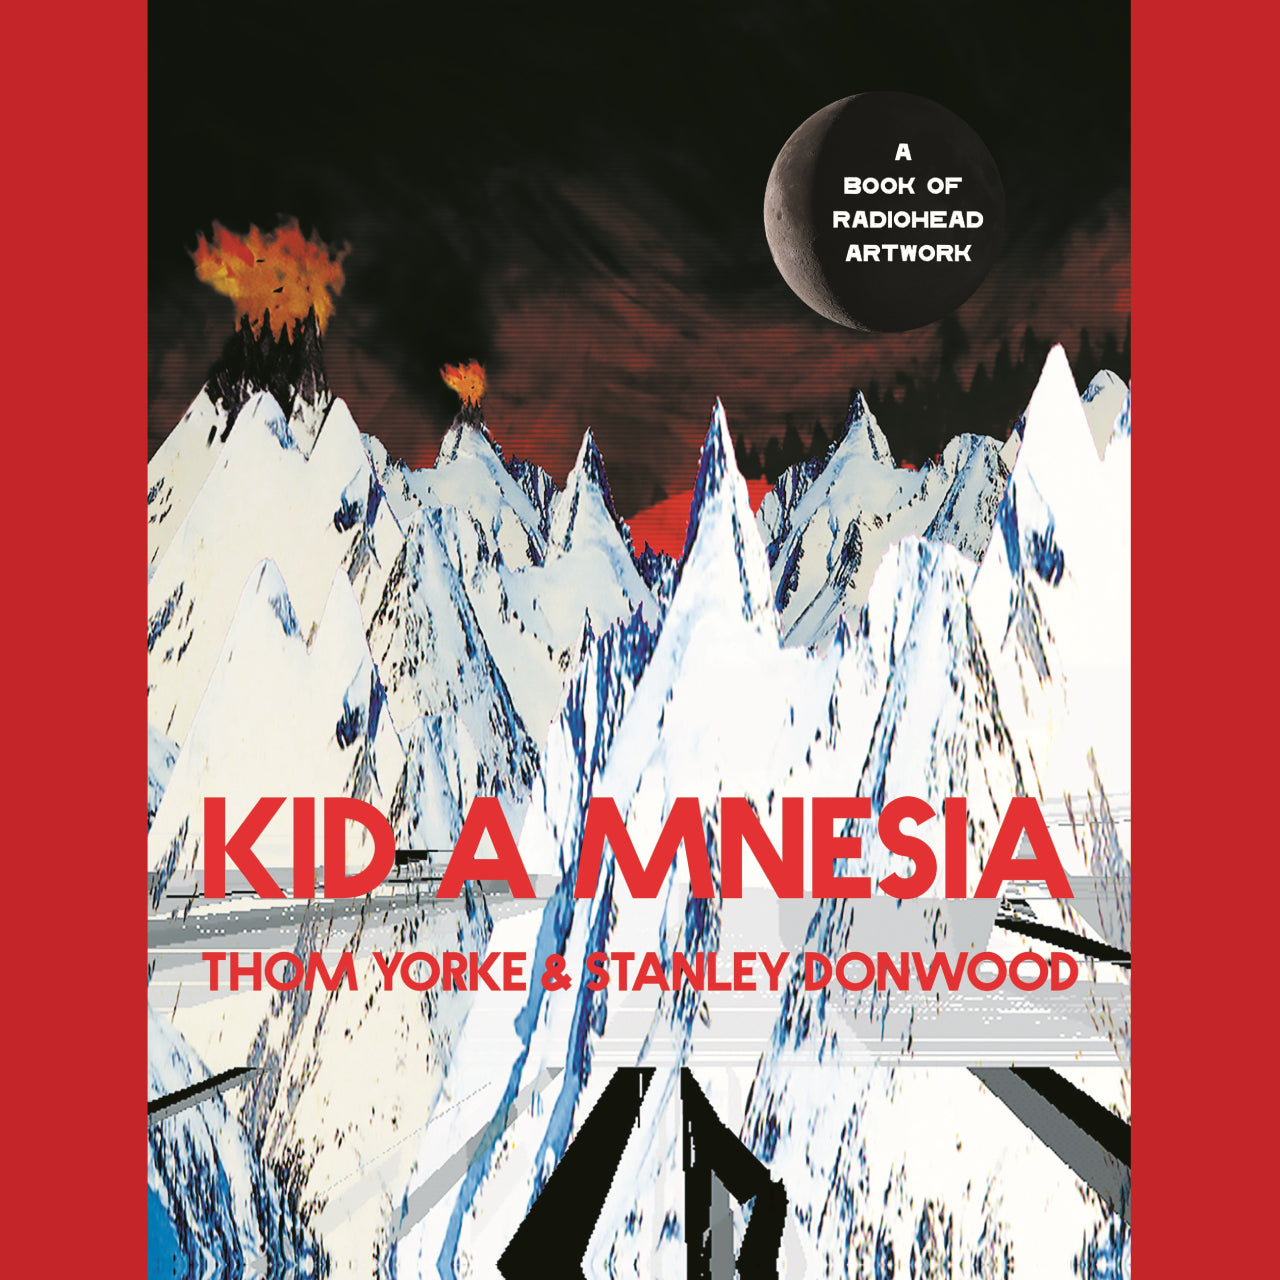 Thom Yorke & Stanley Donwood - Kid A Mnesia: A Book of Radiohead Artwork | Buy the book from Flying Nun Records